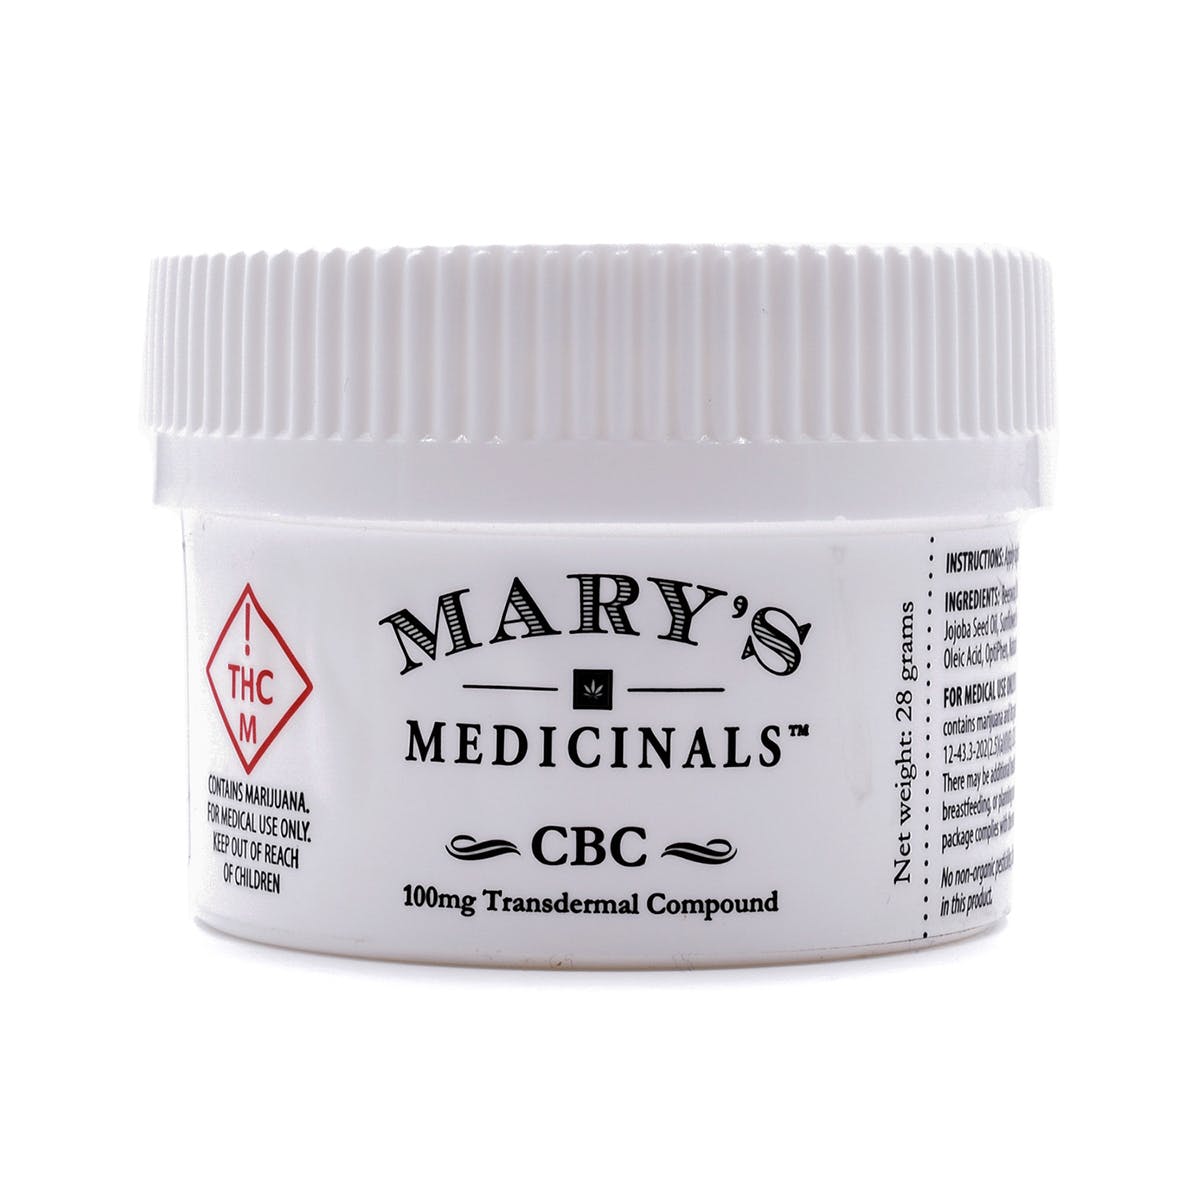 marijuana-dispensaries-the-clinic-on-wadsworth-medical-in-lakewood-cbc-transdermal-compound-2c-100mg-med